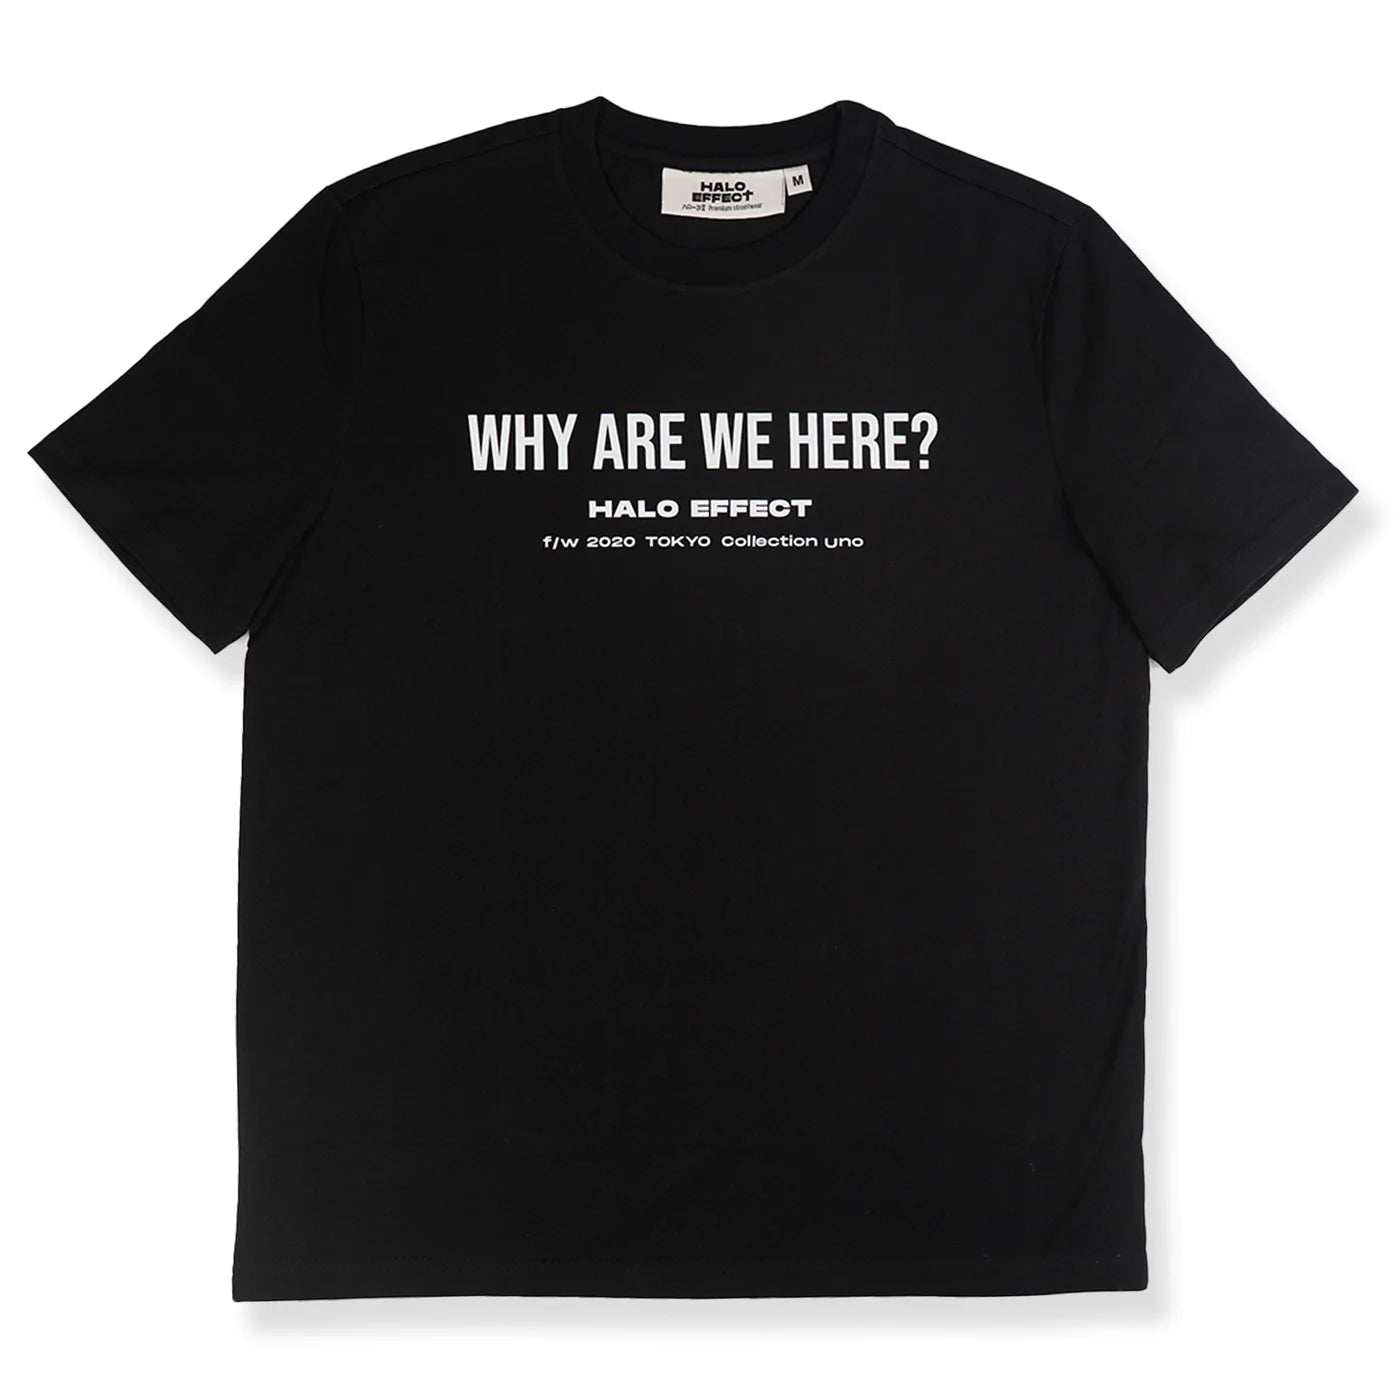 Halo Effect 'Why Are We Here' Black T-Shirt